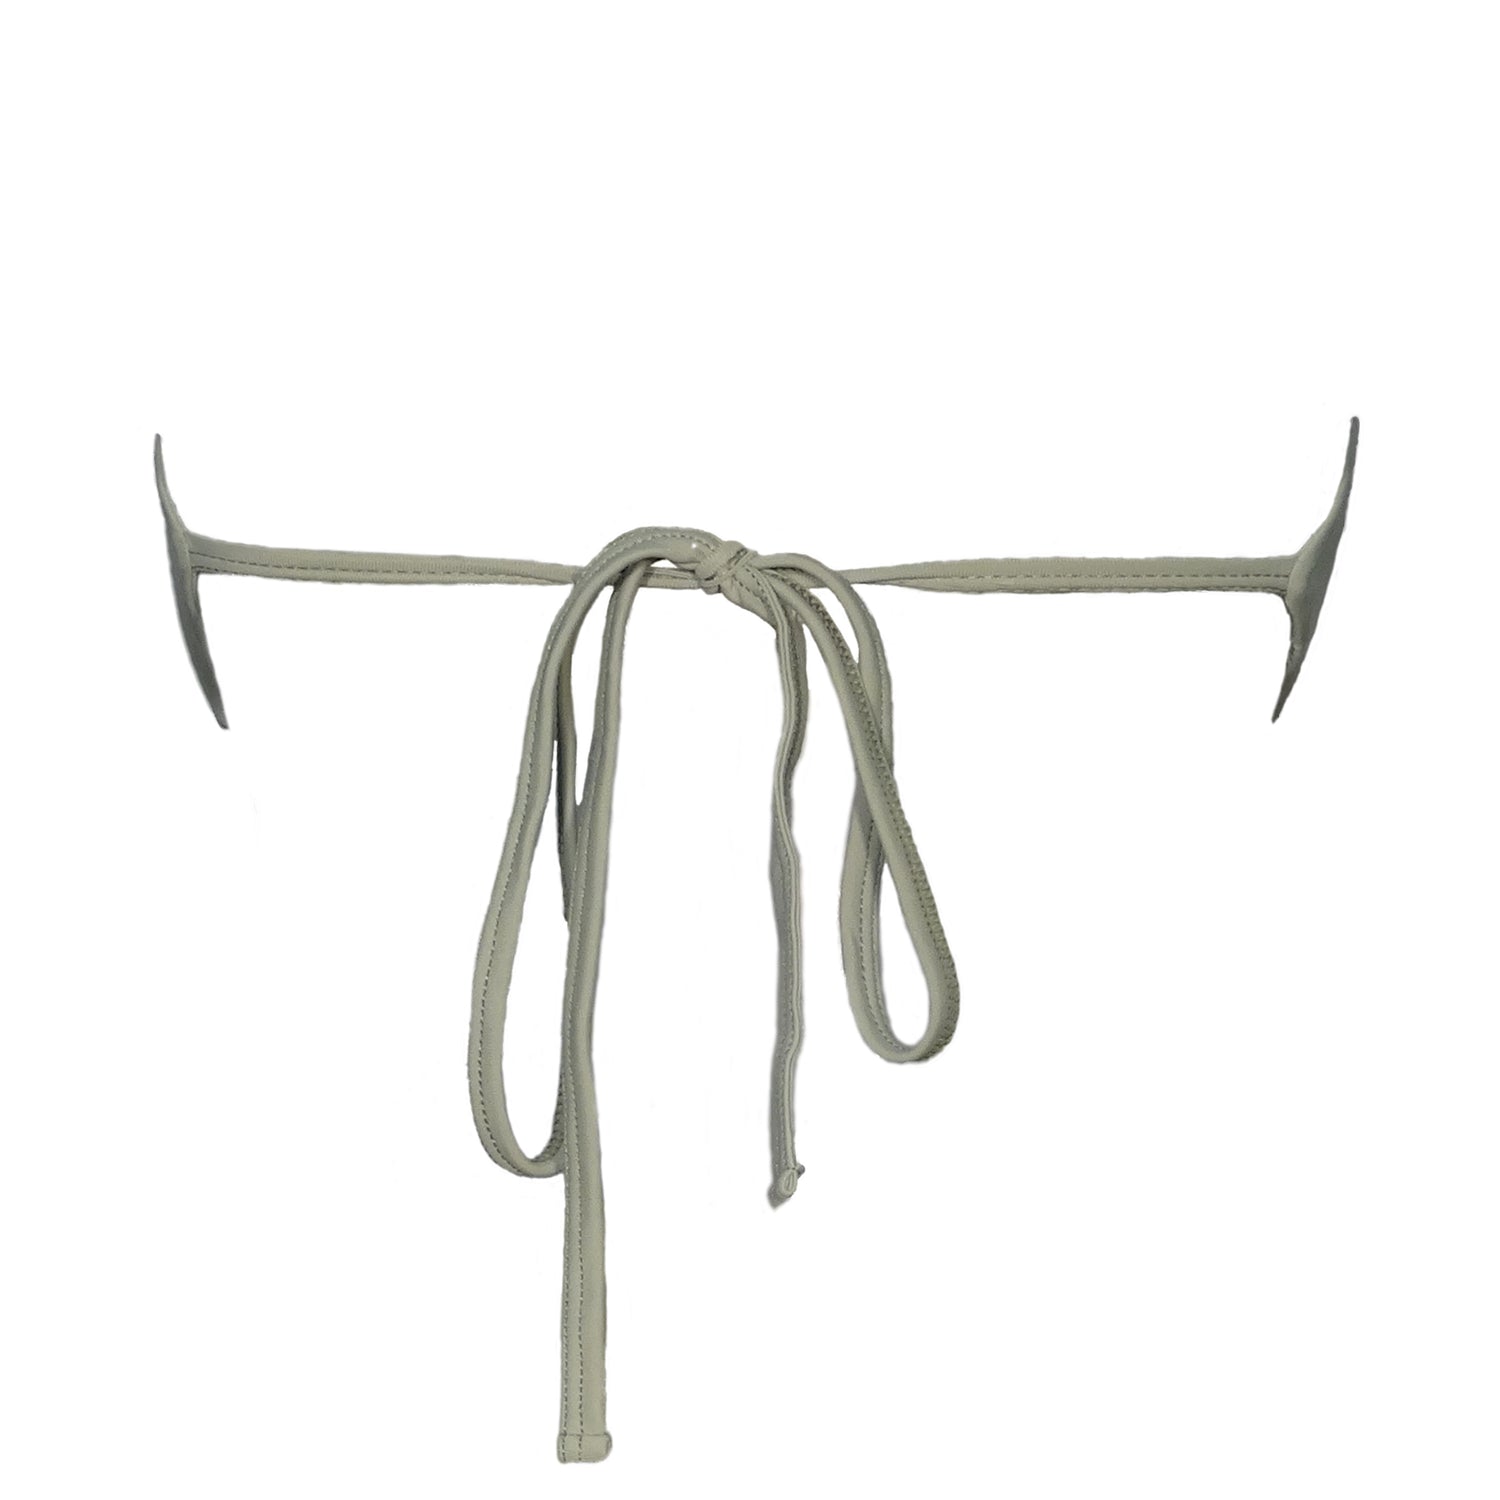 Back view of the sage green strapless bikini top with an adjustable tie back closure.